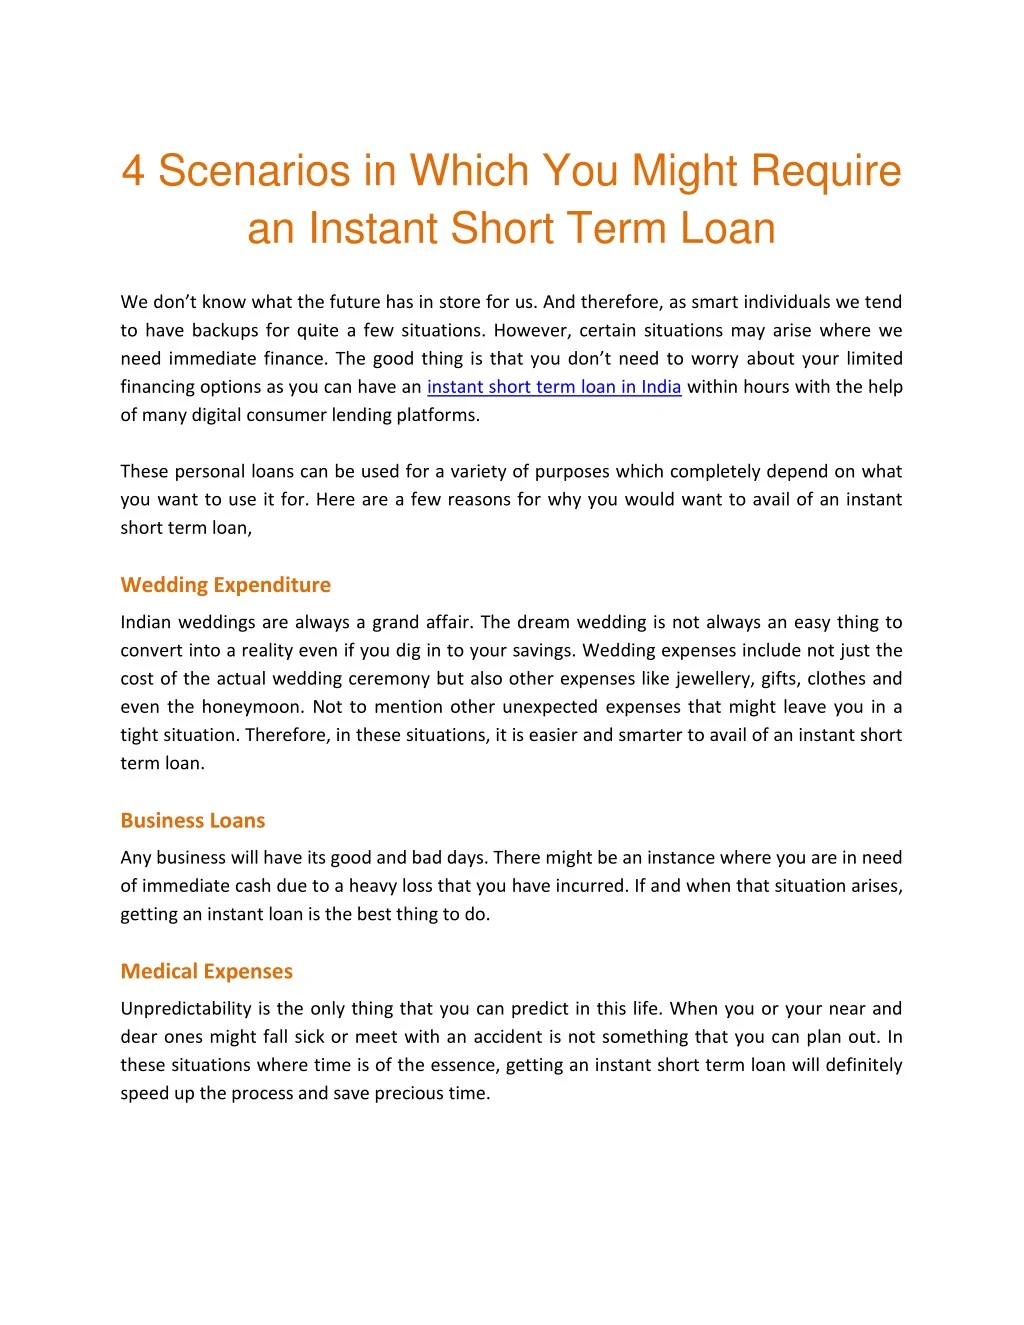 4 scenarios in which you might require an instant